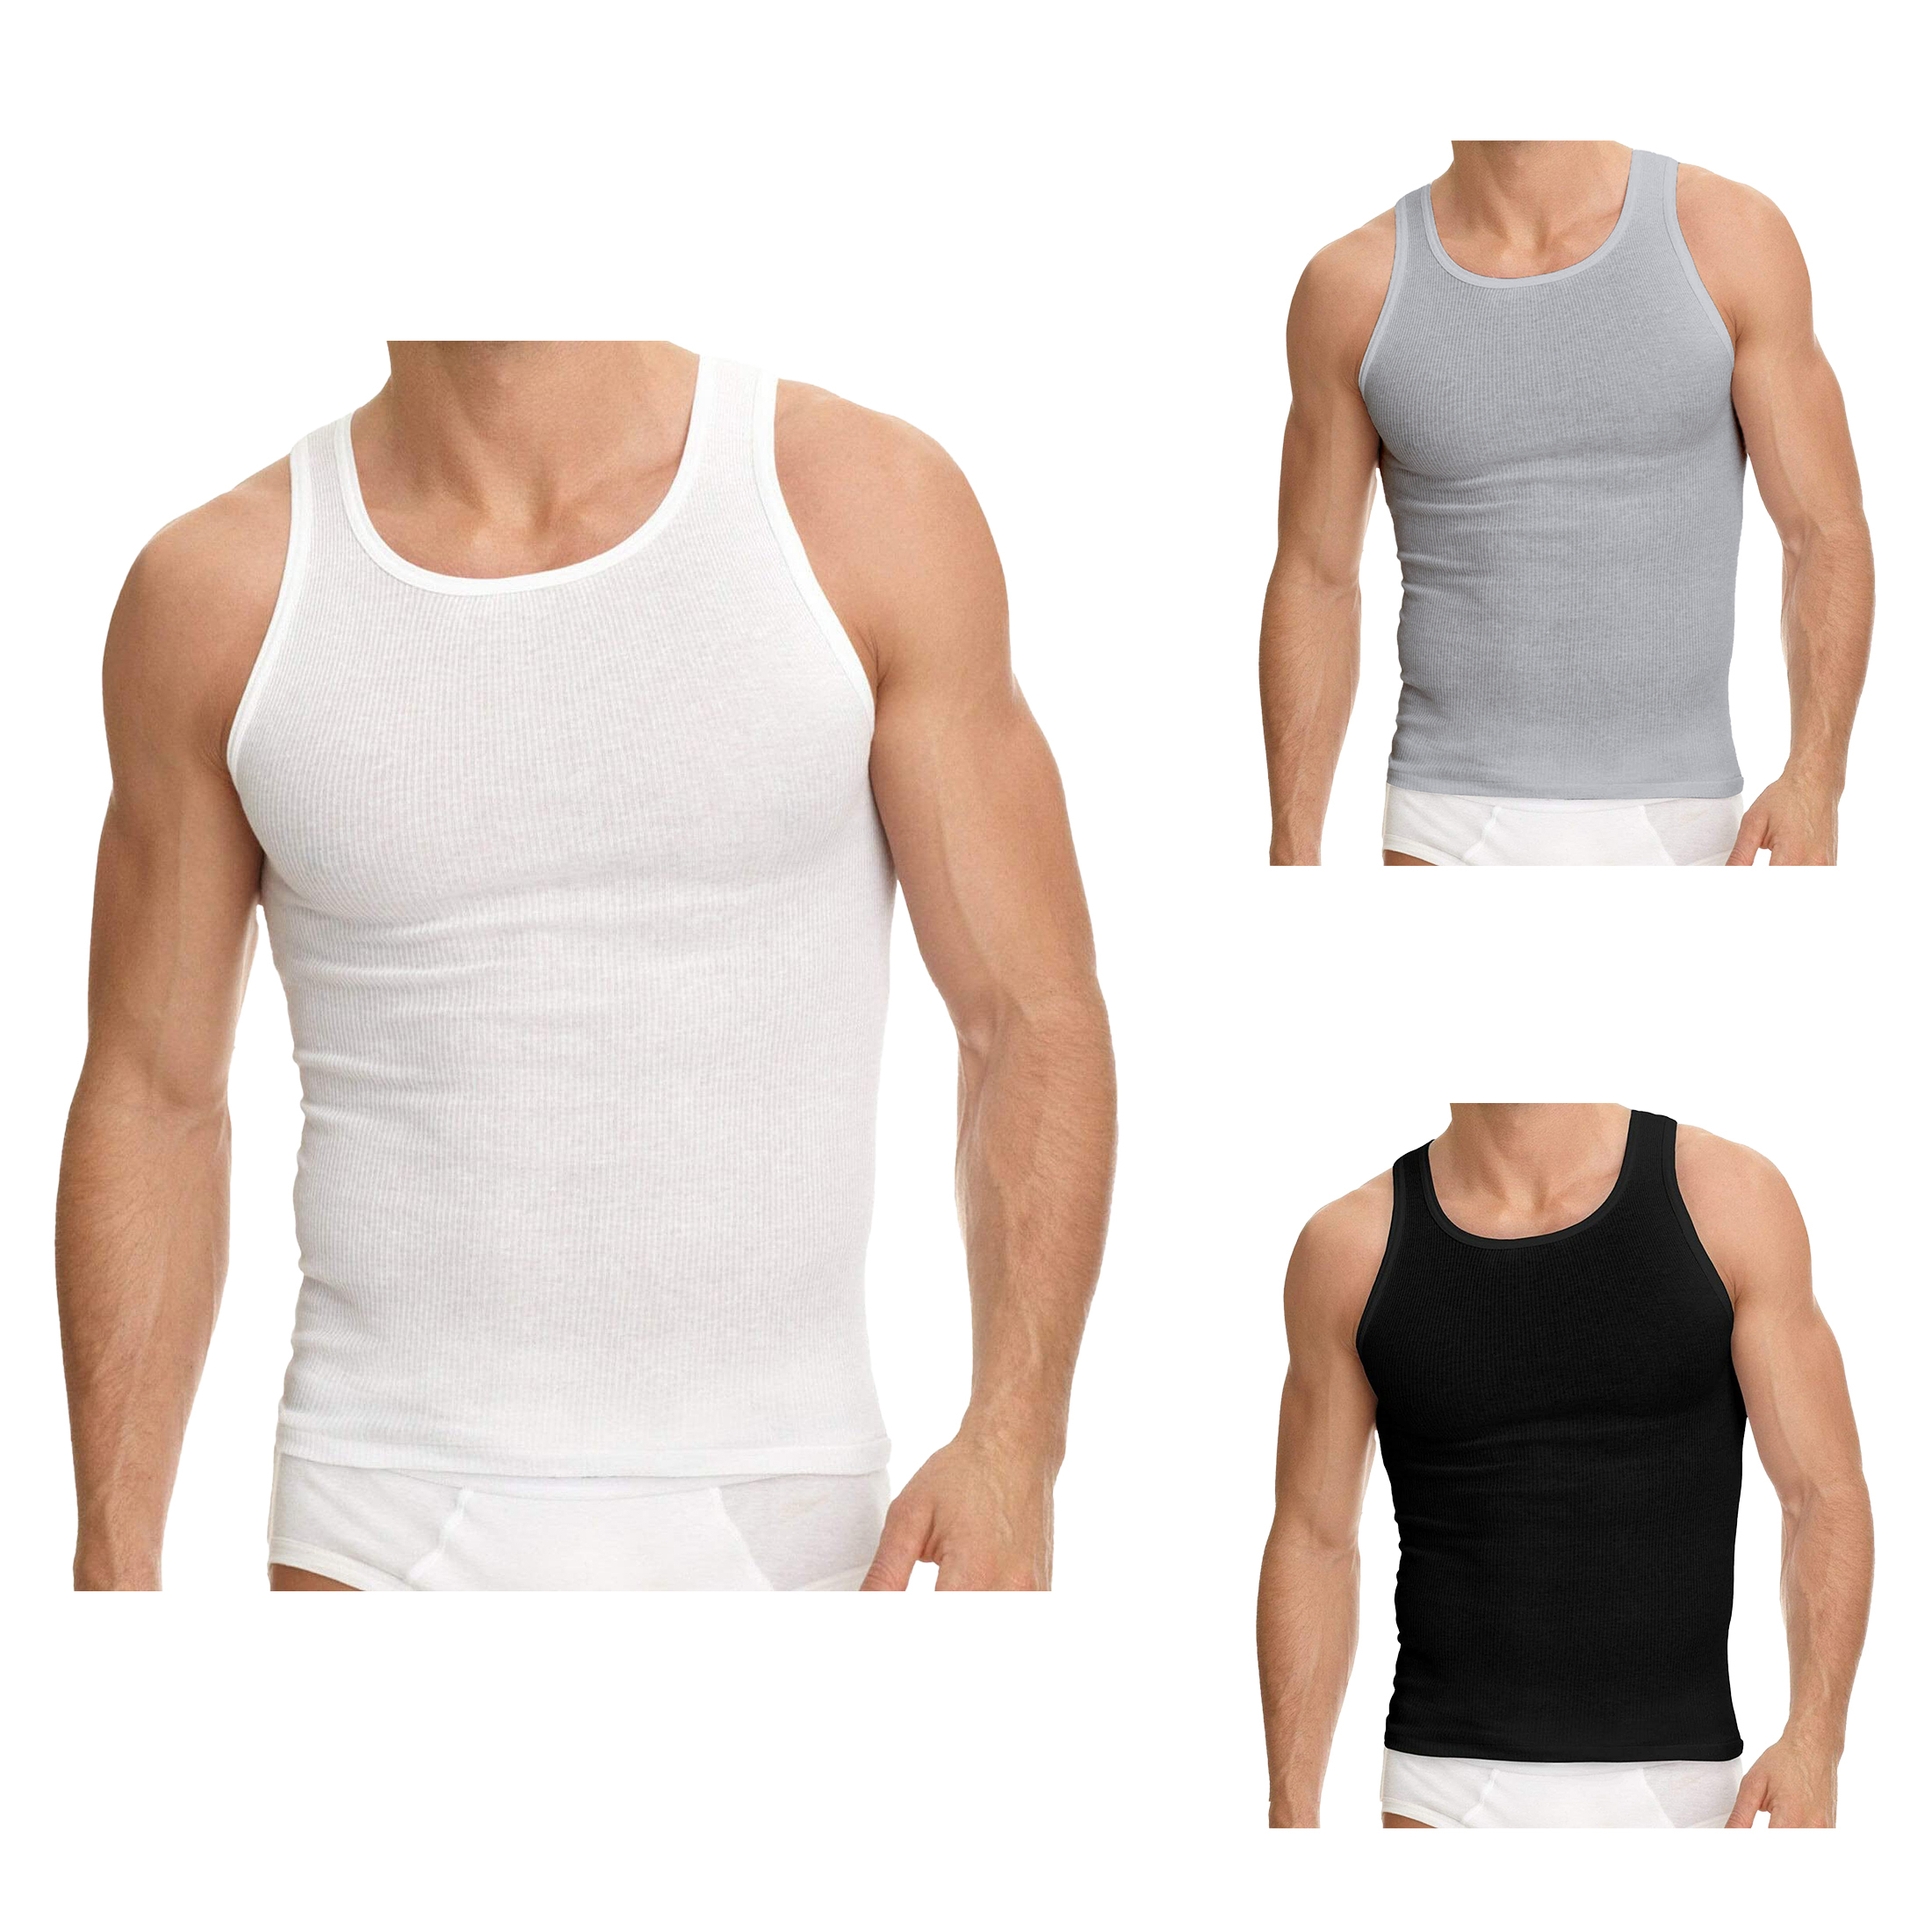 12-Pack: Men's Solid Cotton Soft Ribbed Slim-Fitting Summer Tank Tops - White, X-Large